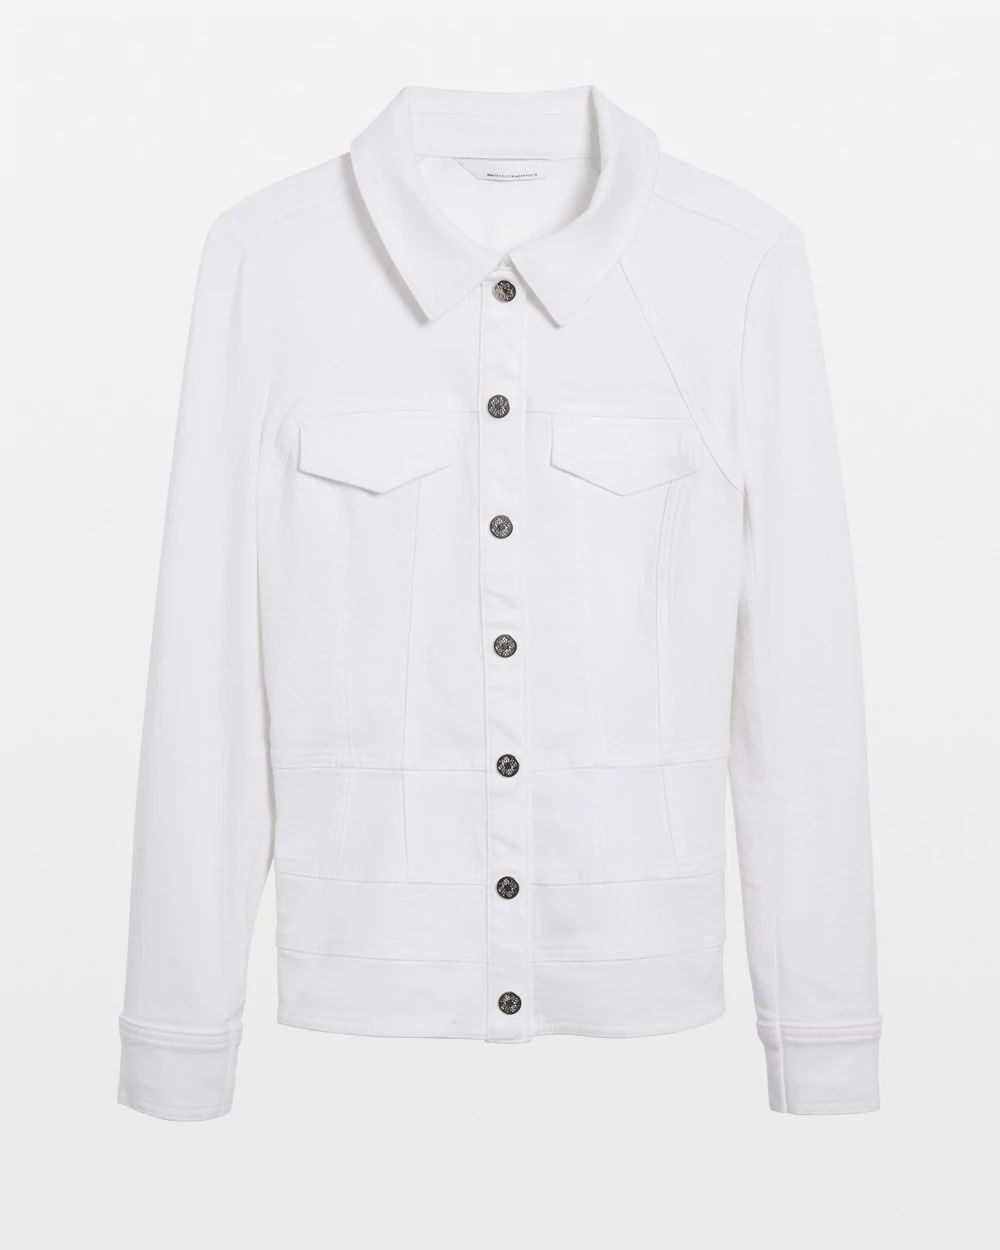 Petite Seamed White Denim Jacket click to view larger image.